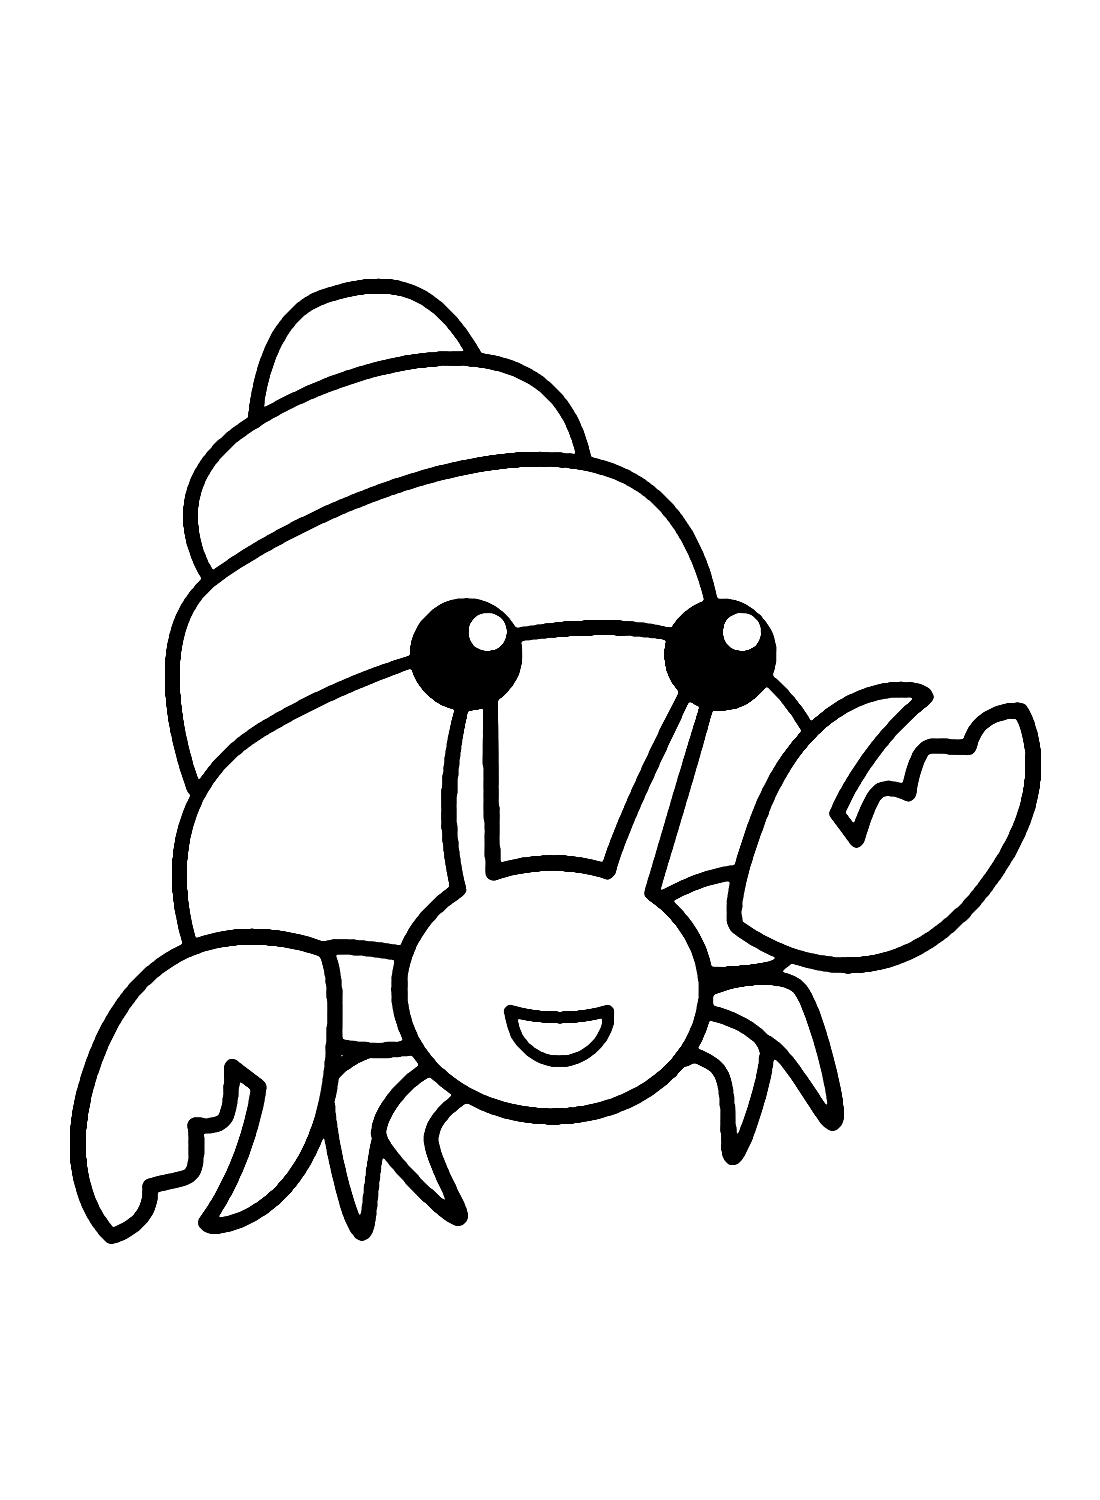 Hermit crab coloring pages printable for free download